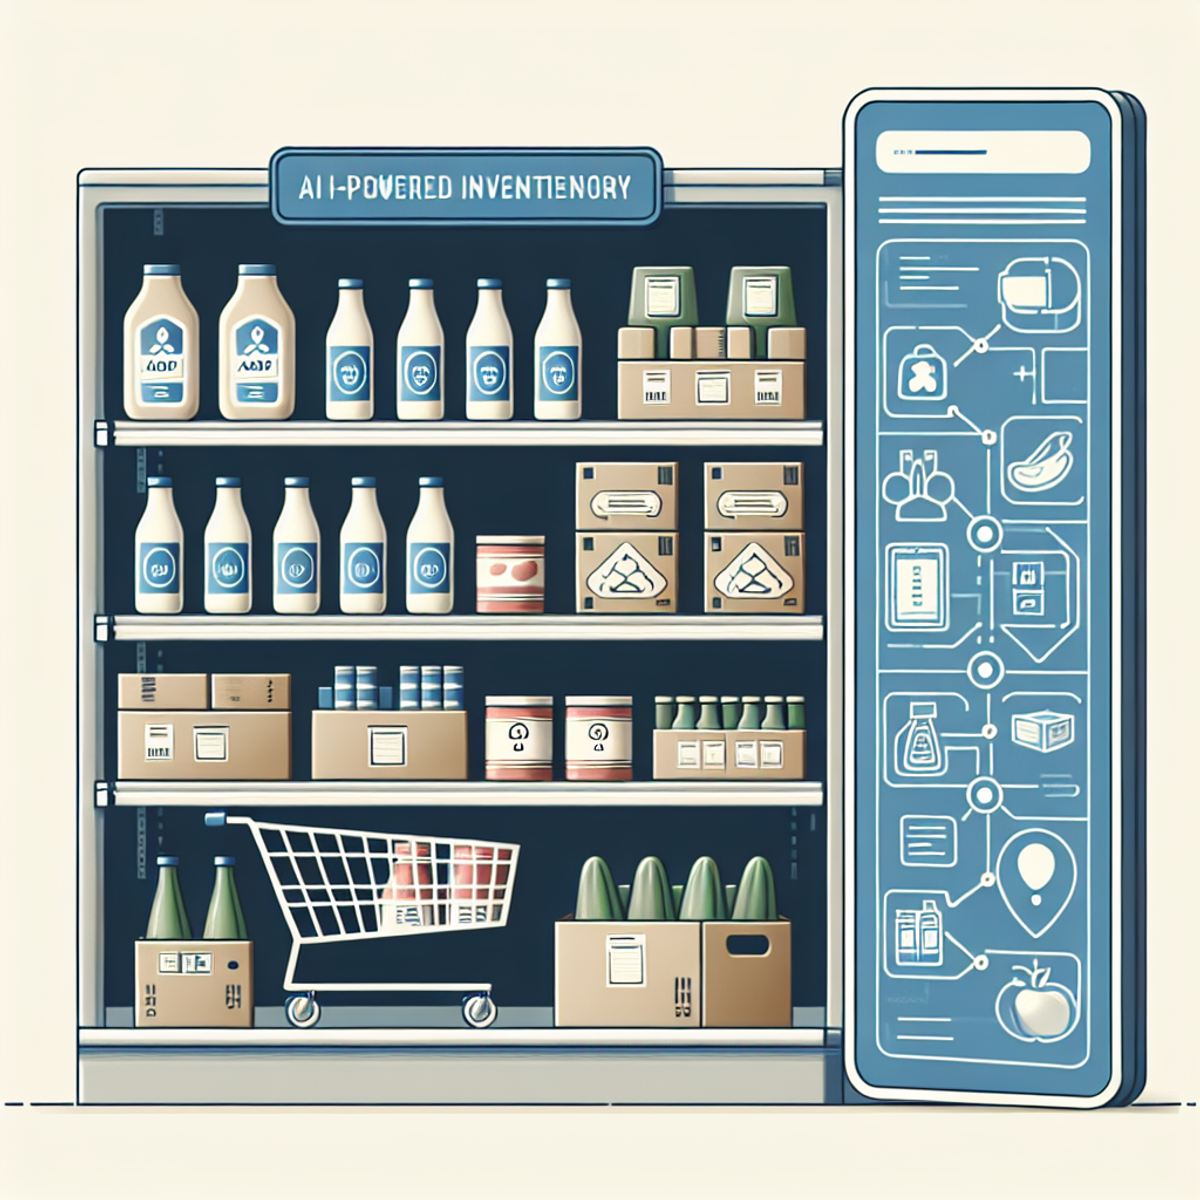 A high-tech grocery store shelf with AI-powered inventory management system displaying symbols indicating sensor and digital tag tracking.